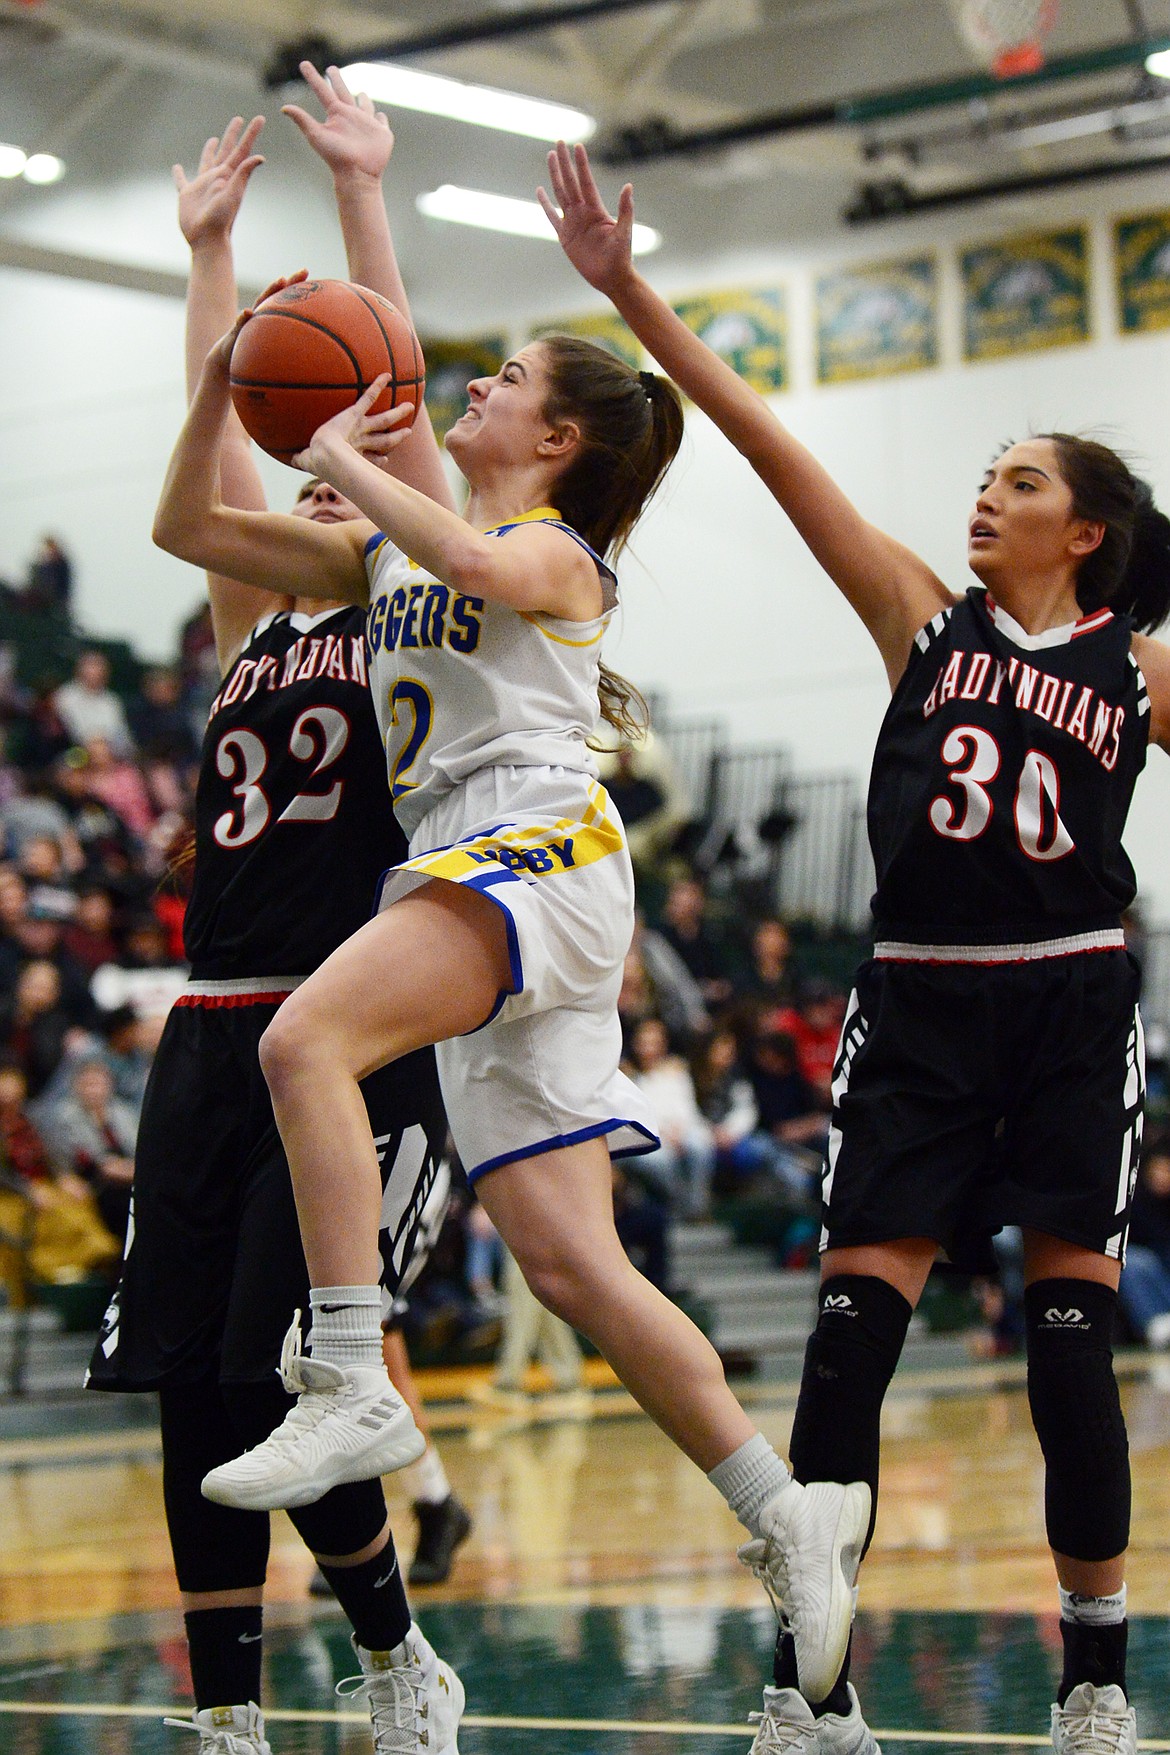 Libby's Alli Collins (12) drives to the basket against Browning's Taylor Jordan (32) and Dulci Skunkcap (30) at Whitefish High School on Friday. (Casey Kreider/Daily Inter Lake)